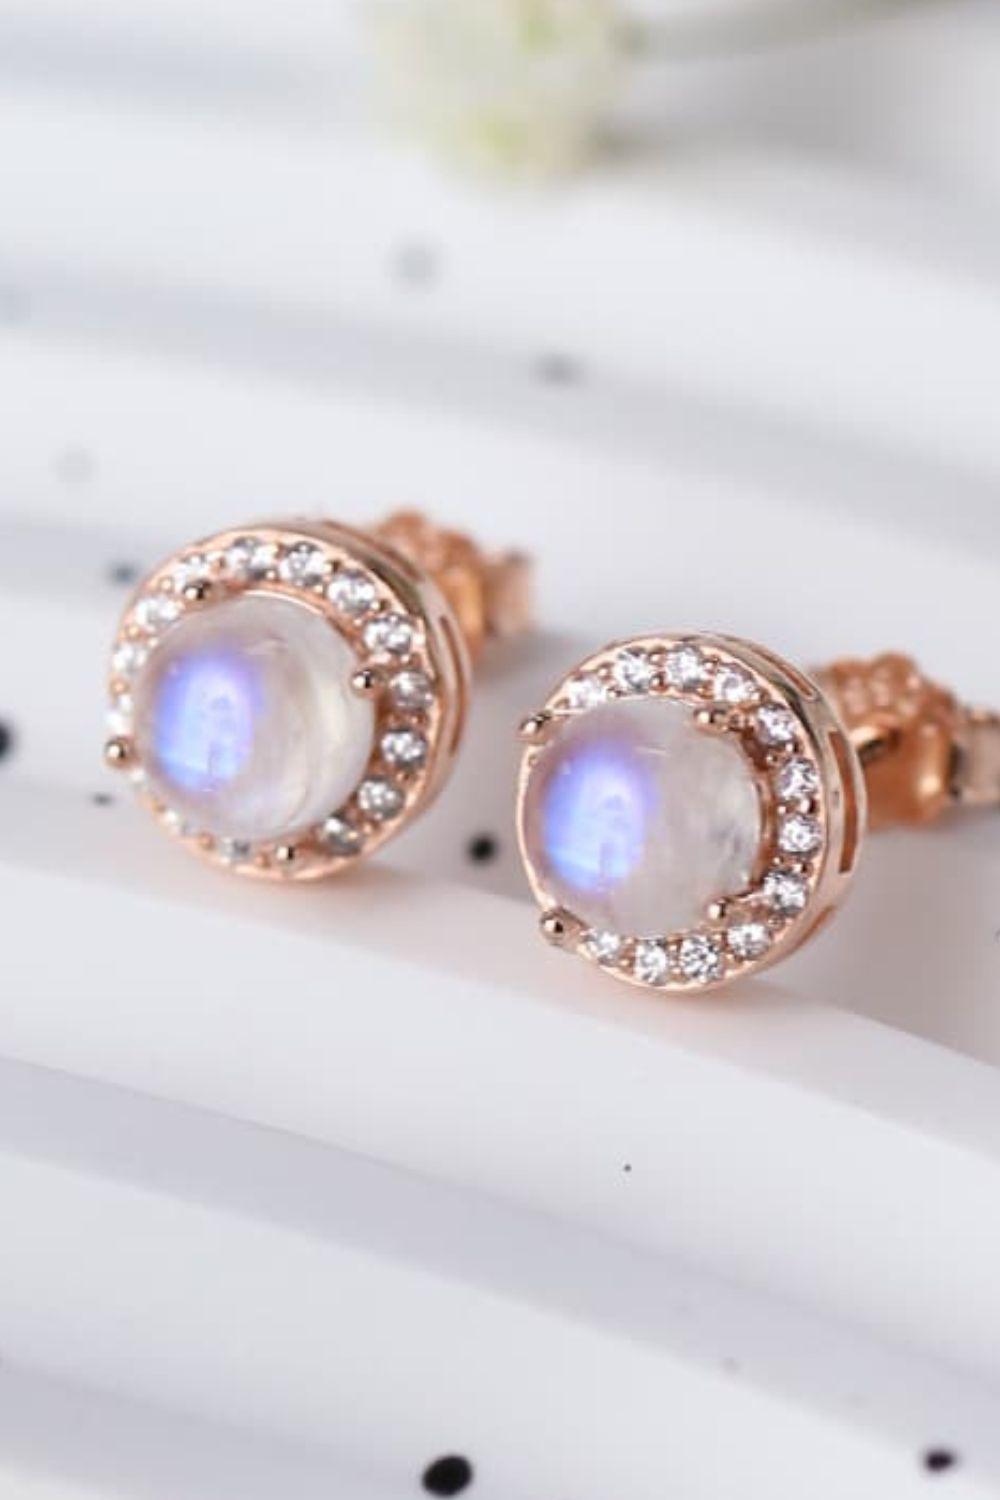 High Quality Natural Moonstone 925 Sterling Silver Stud Earrings BLUE ZONE PLANET